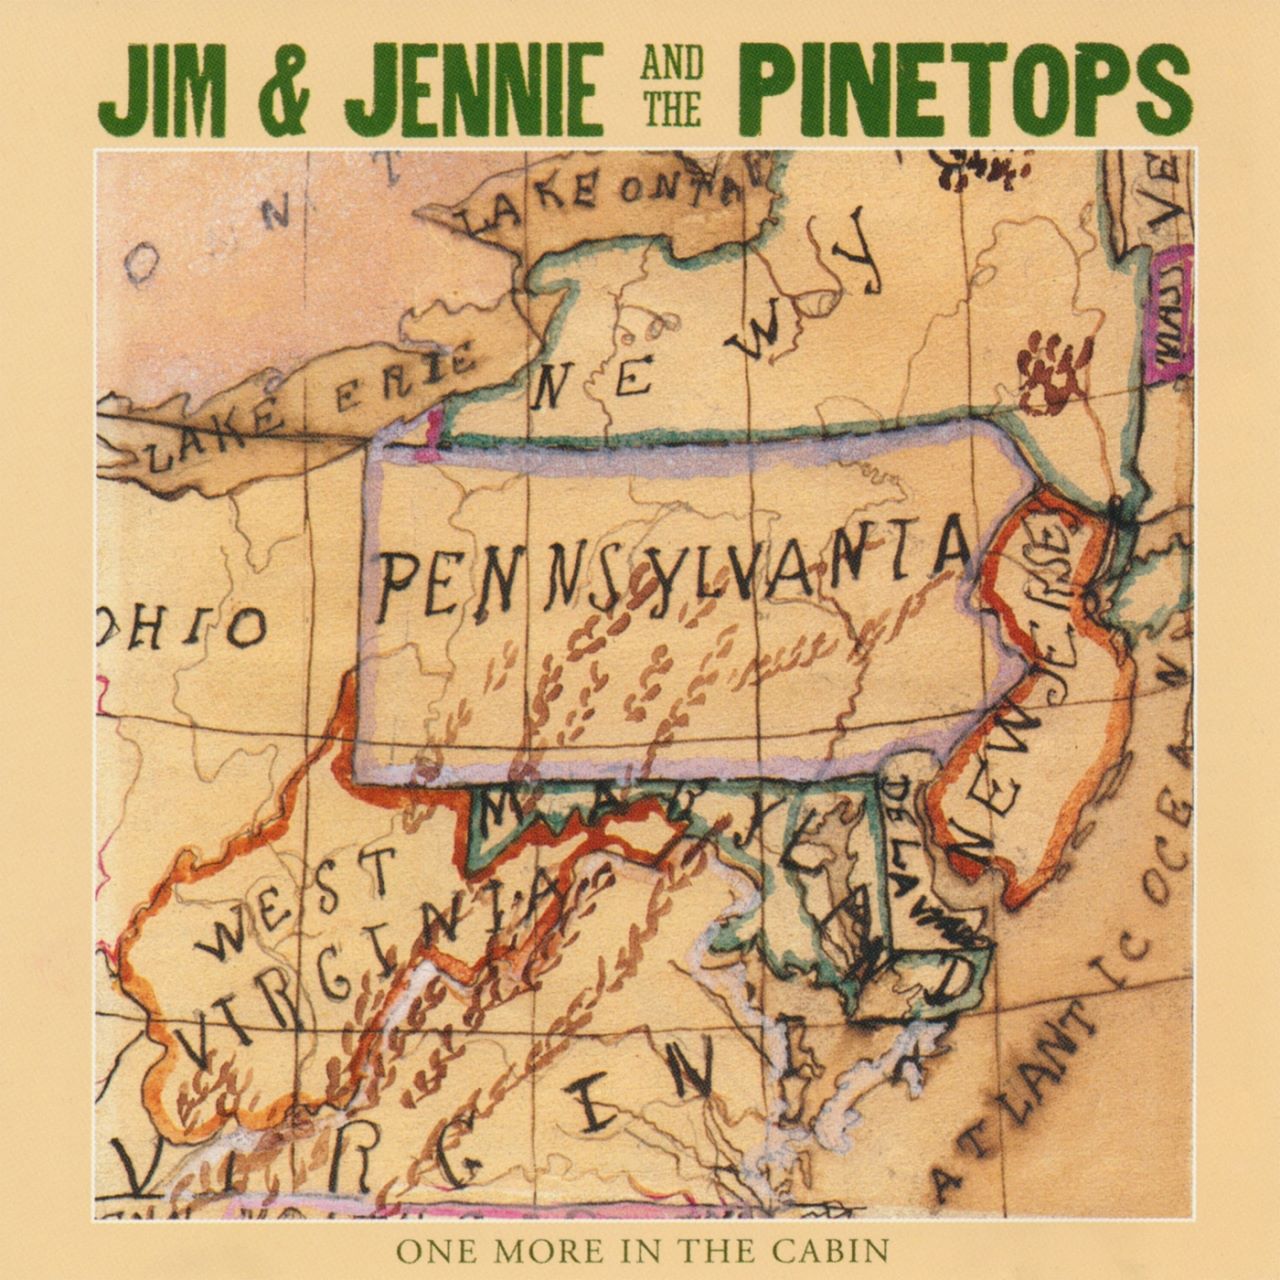 Jim & Jennie And The Pinetops - One More In The Cabin cover album